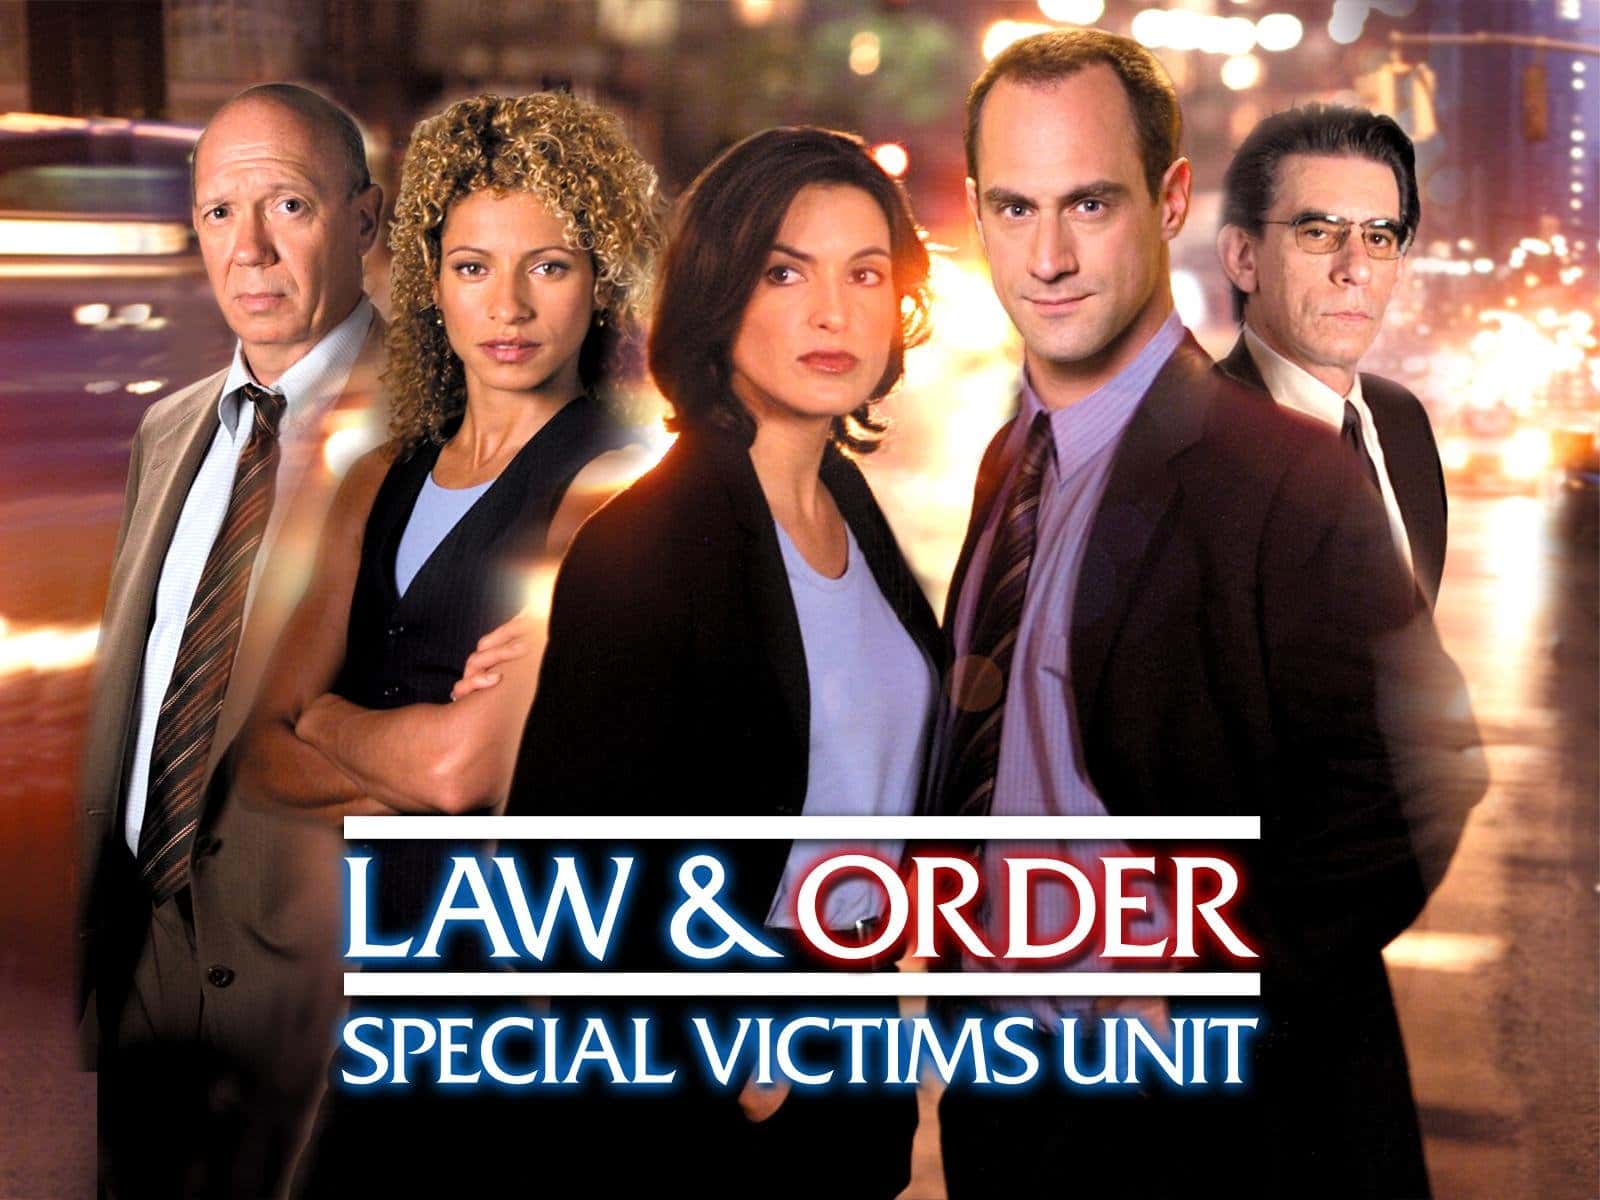 28 Investigative Facts about “Law & Order SVU”